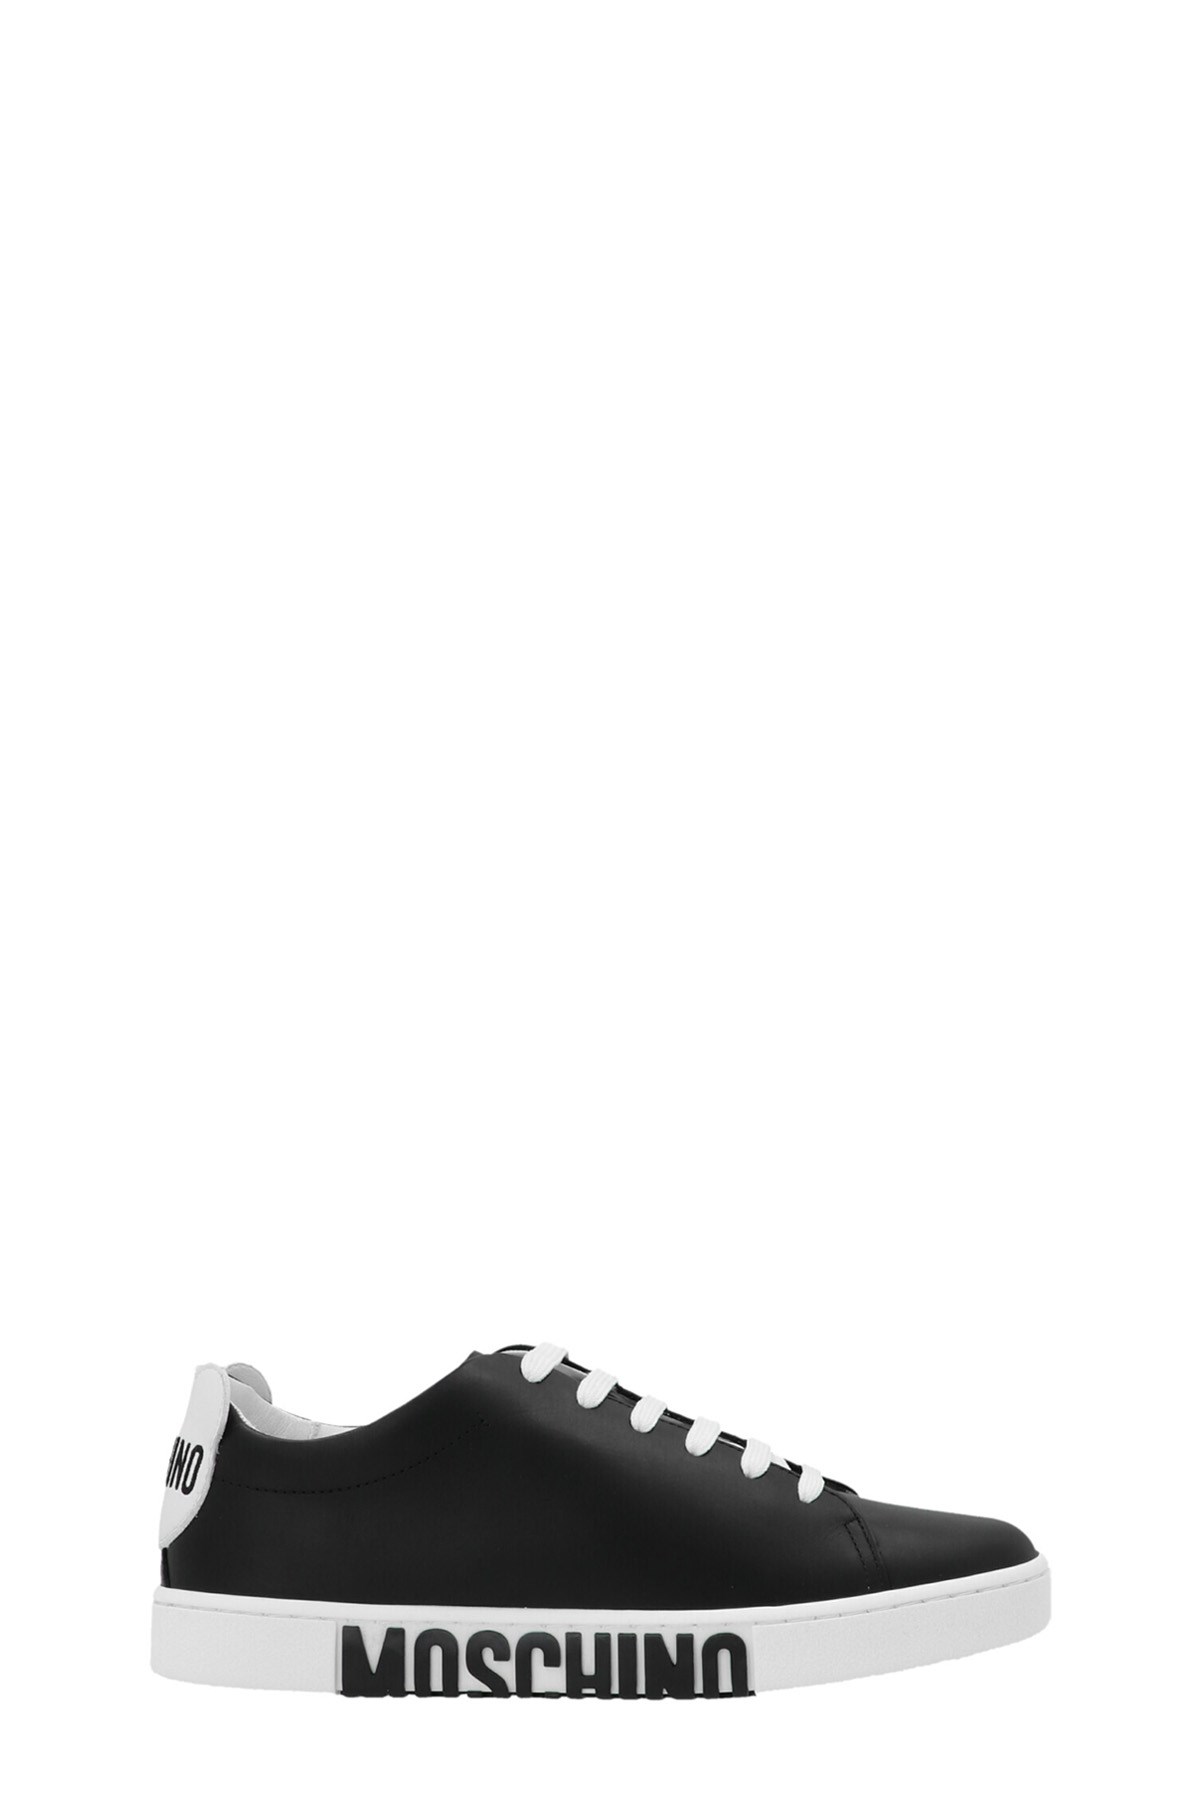 MOSCHINO Side Logo Sneakers